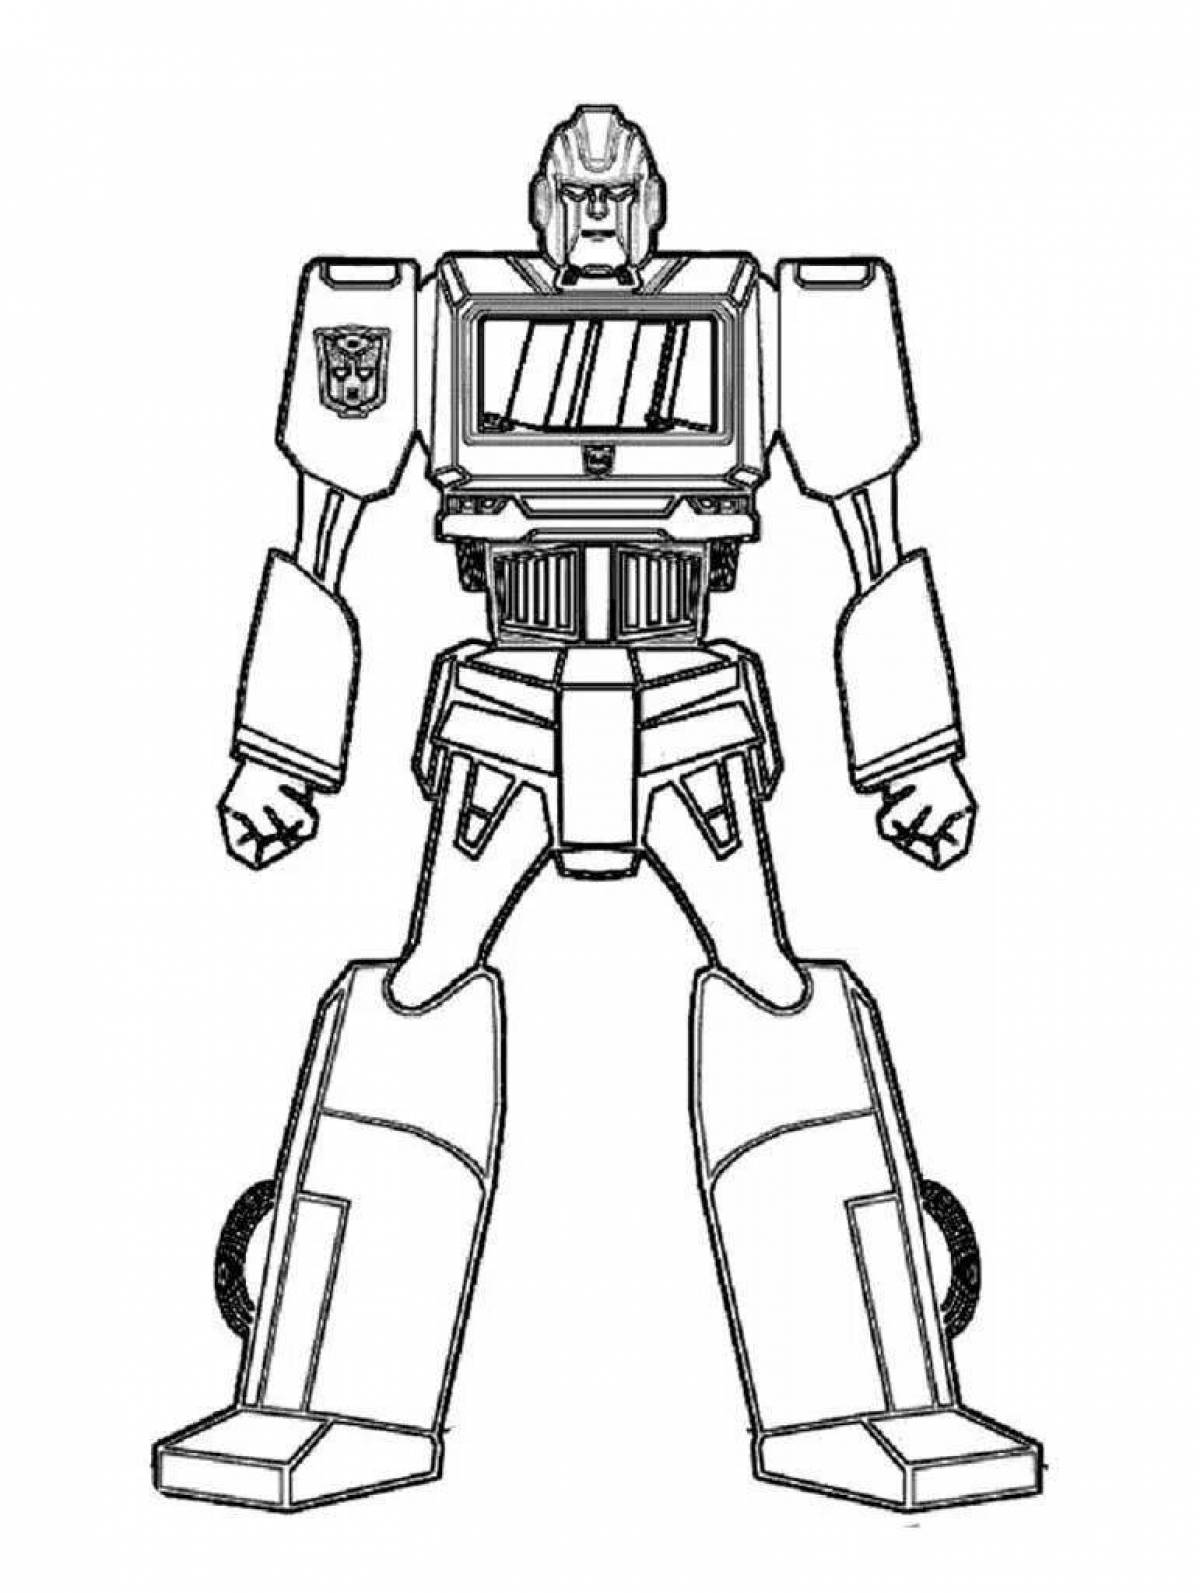 Colorful transforming robot coloring page for kids